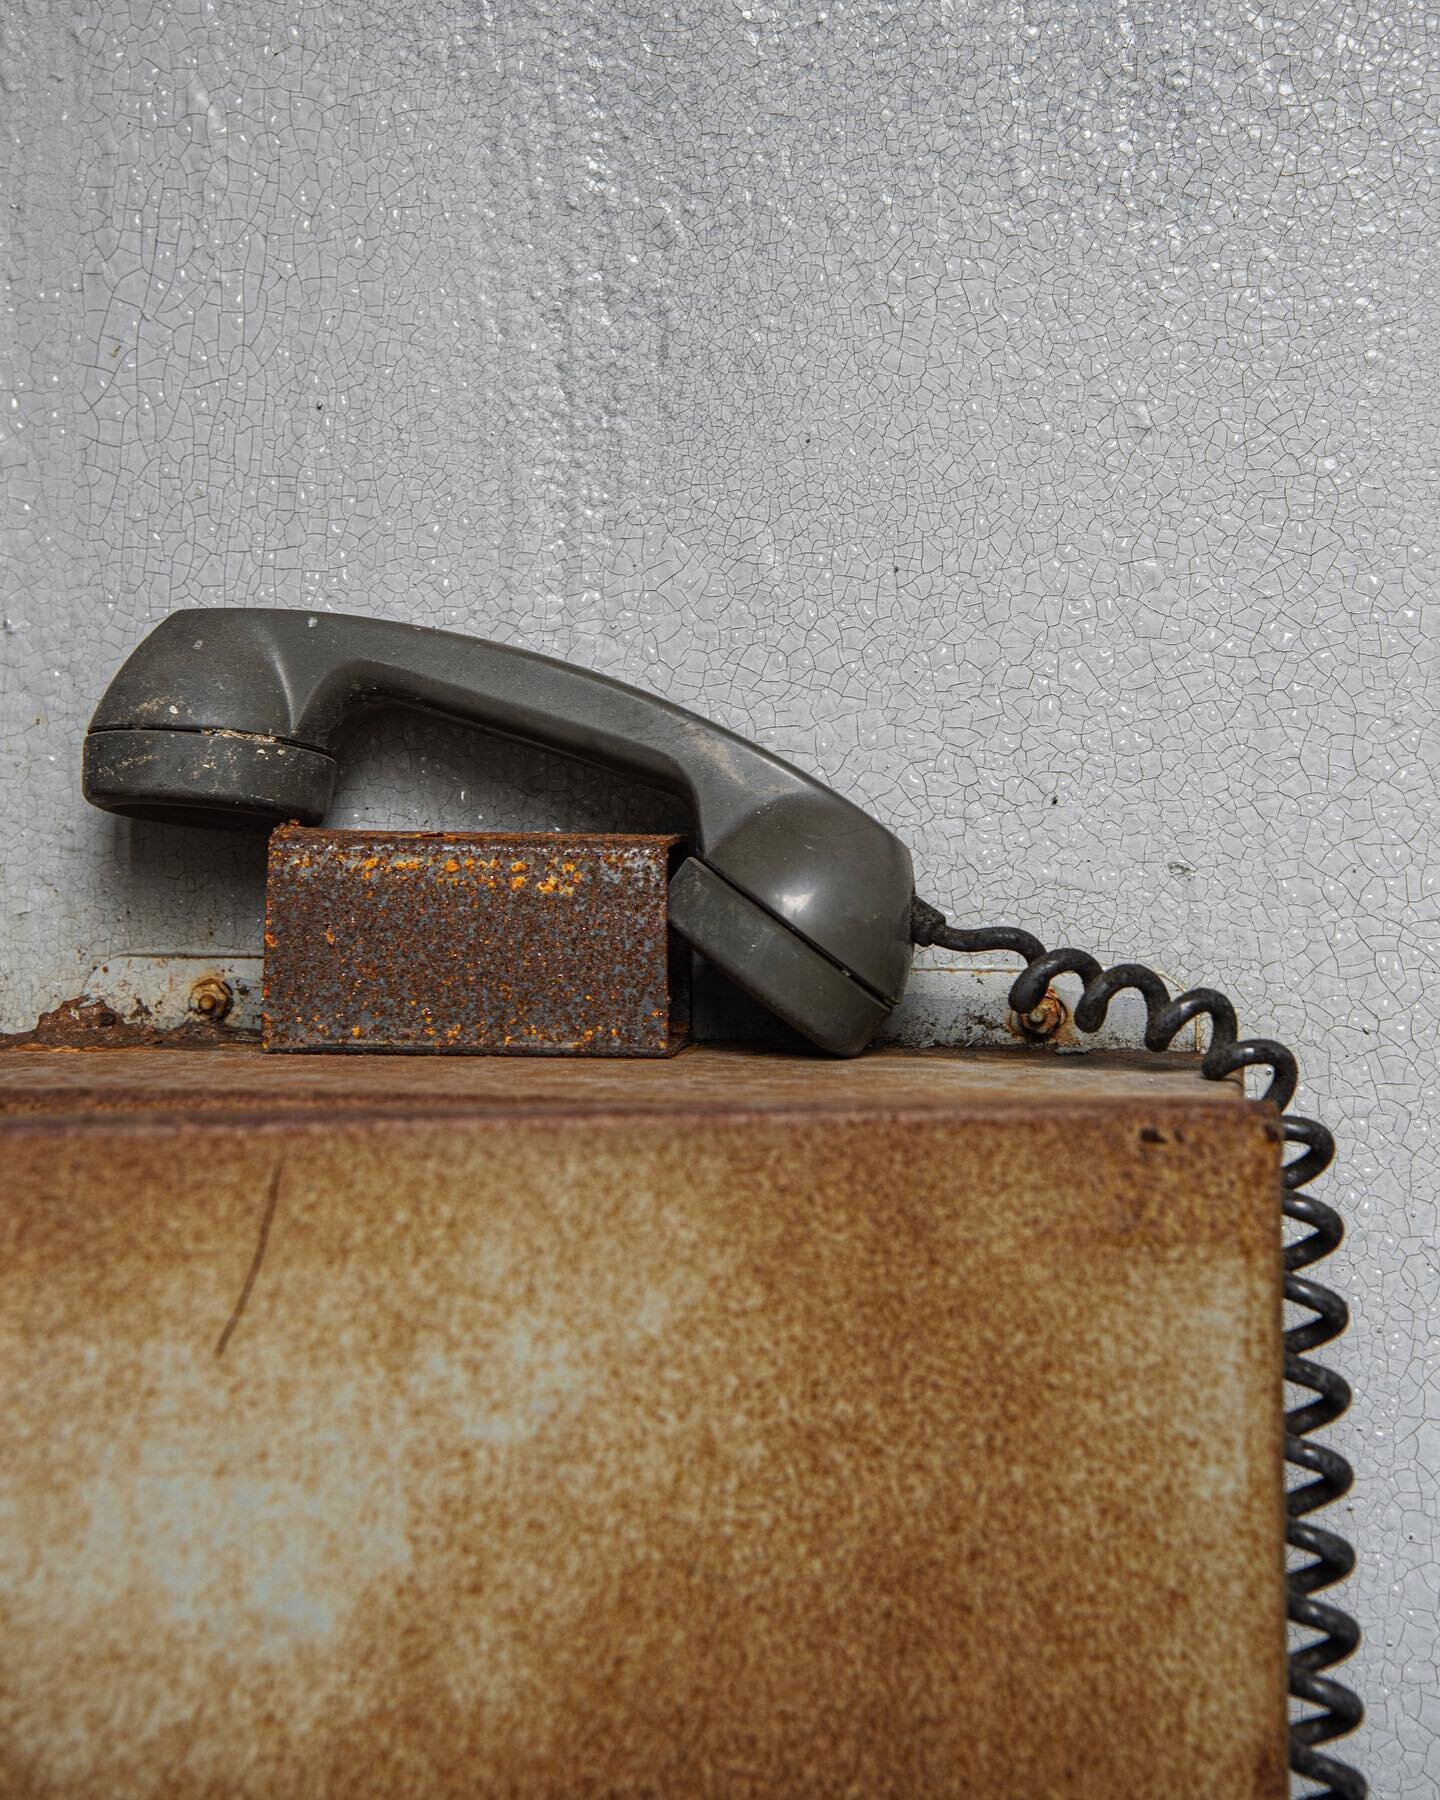 The telephone receivers that I shot in @southdwntn were some of my favorite subjects. Not only does this plastic coil-corded object take us back to the 1900&rsquo;s, it also acts as a simple symbol representing the importance of two-way communication